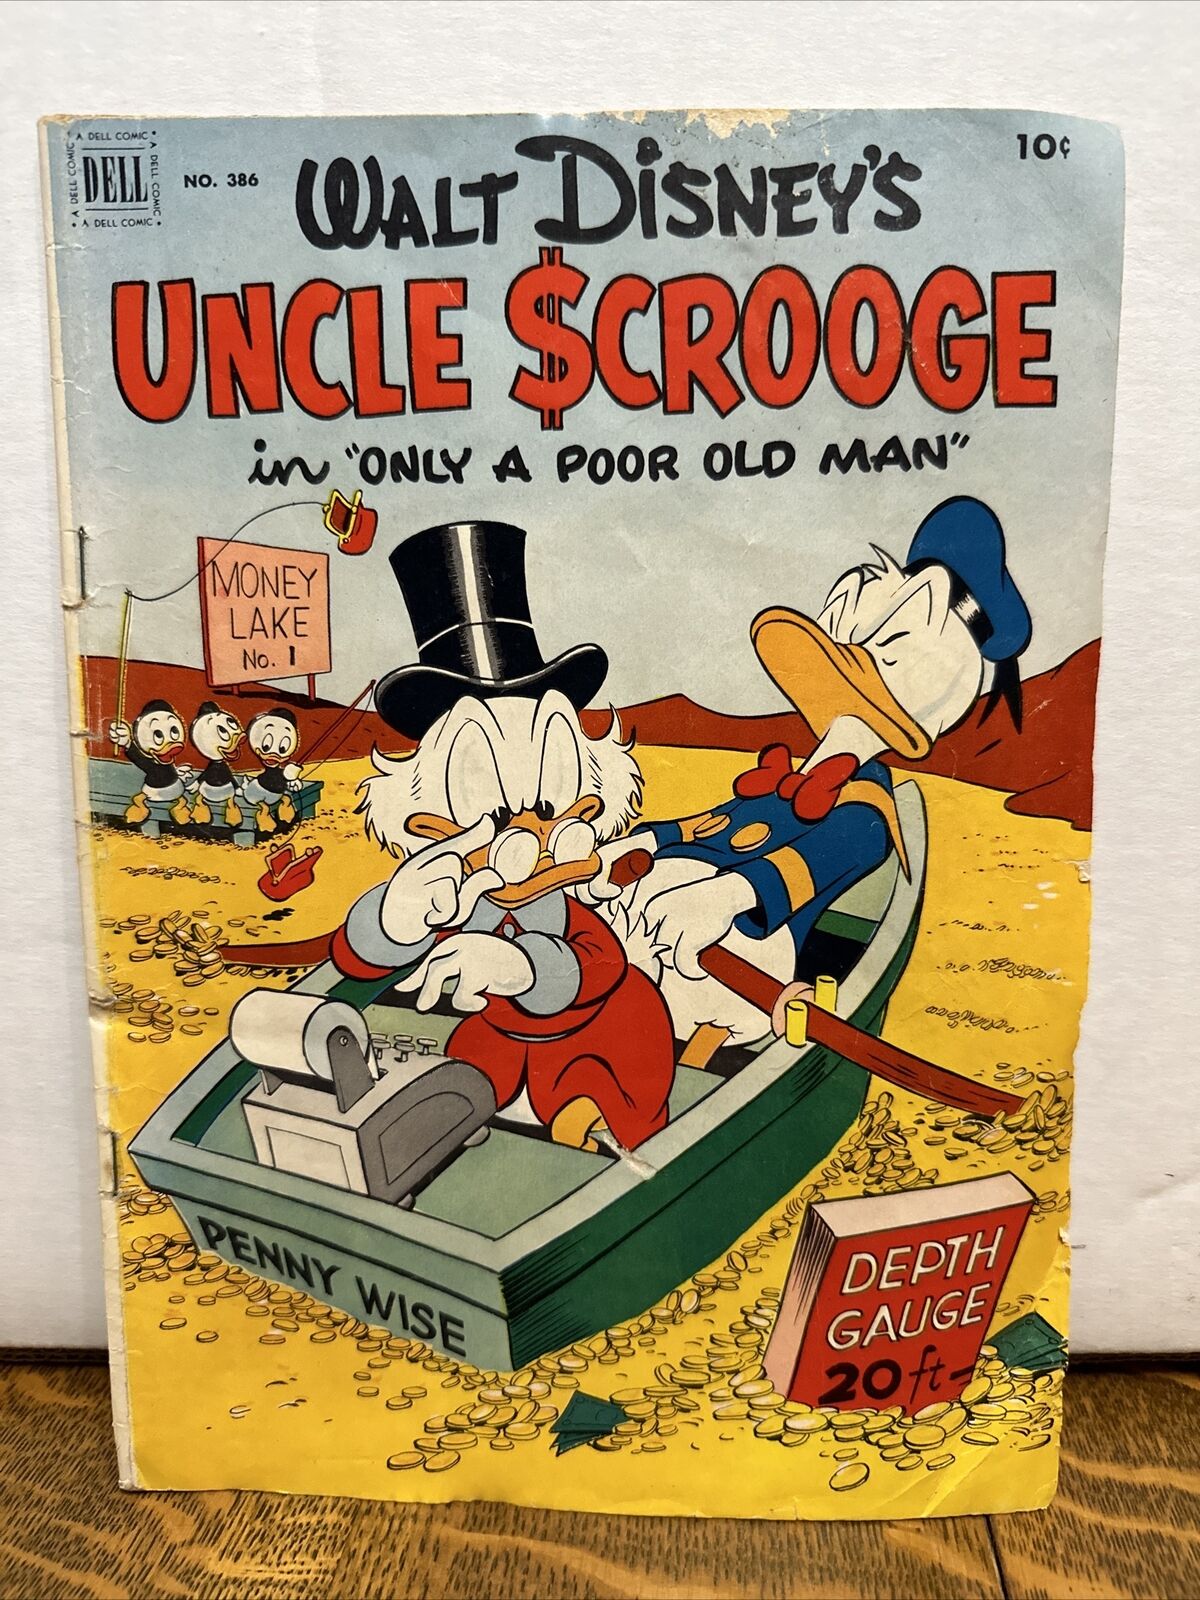 1952 WALT DISNEY'S DELL #386 UNCLE SCROOGE ISSUE #1 COMIC BOOK NICE COMPLETE 